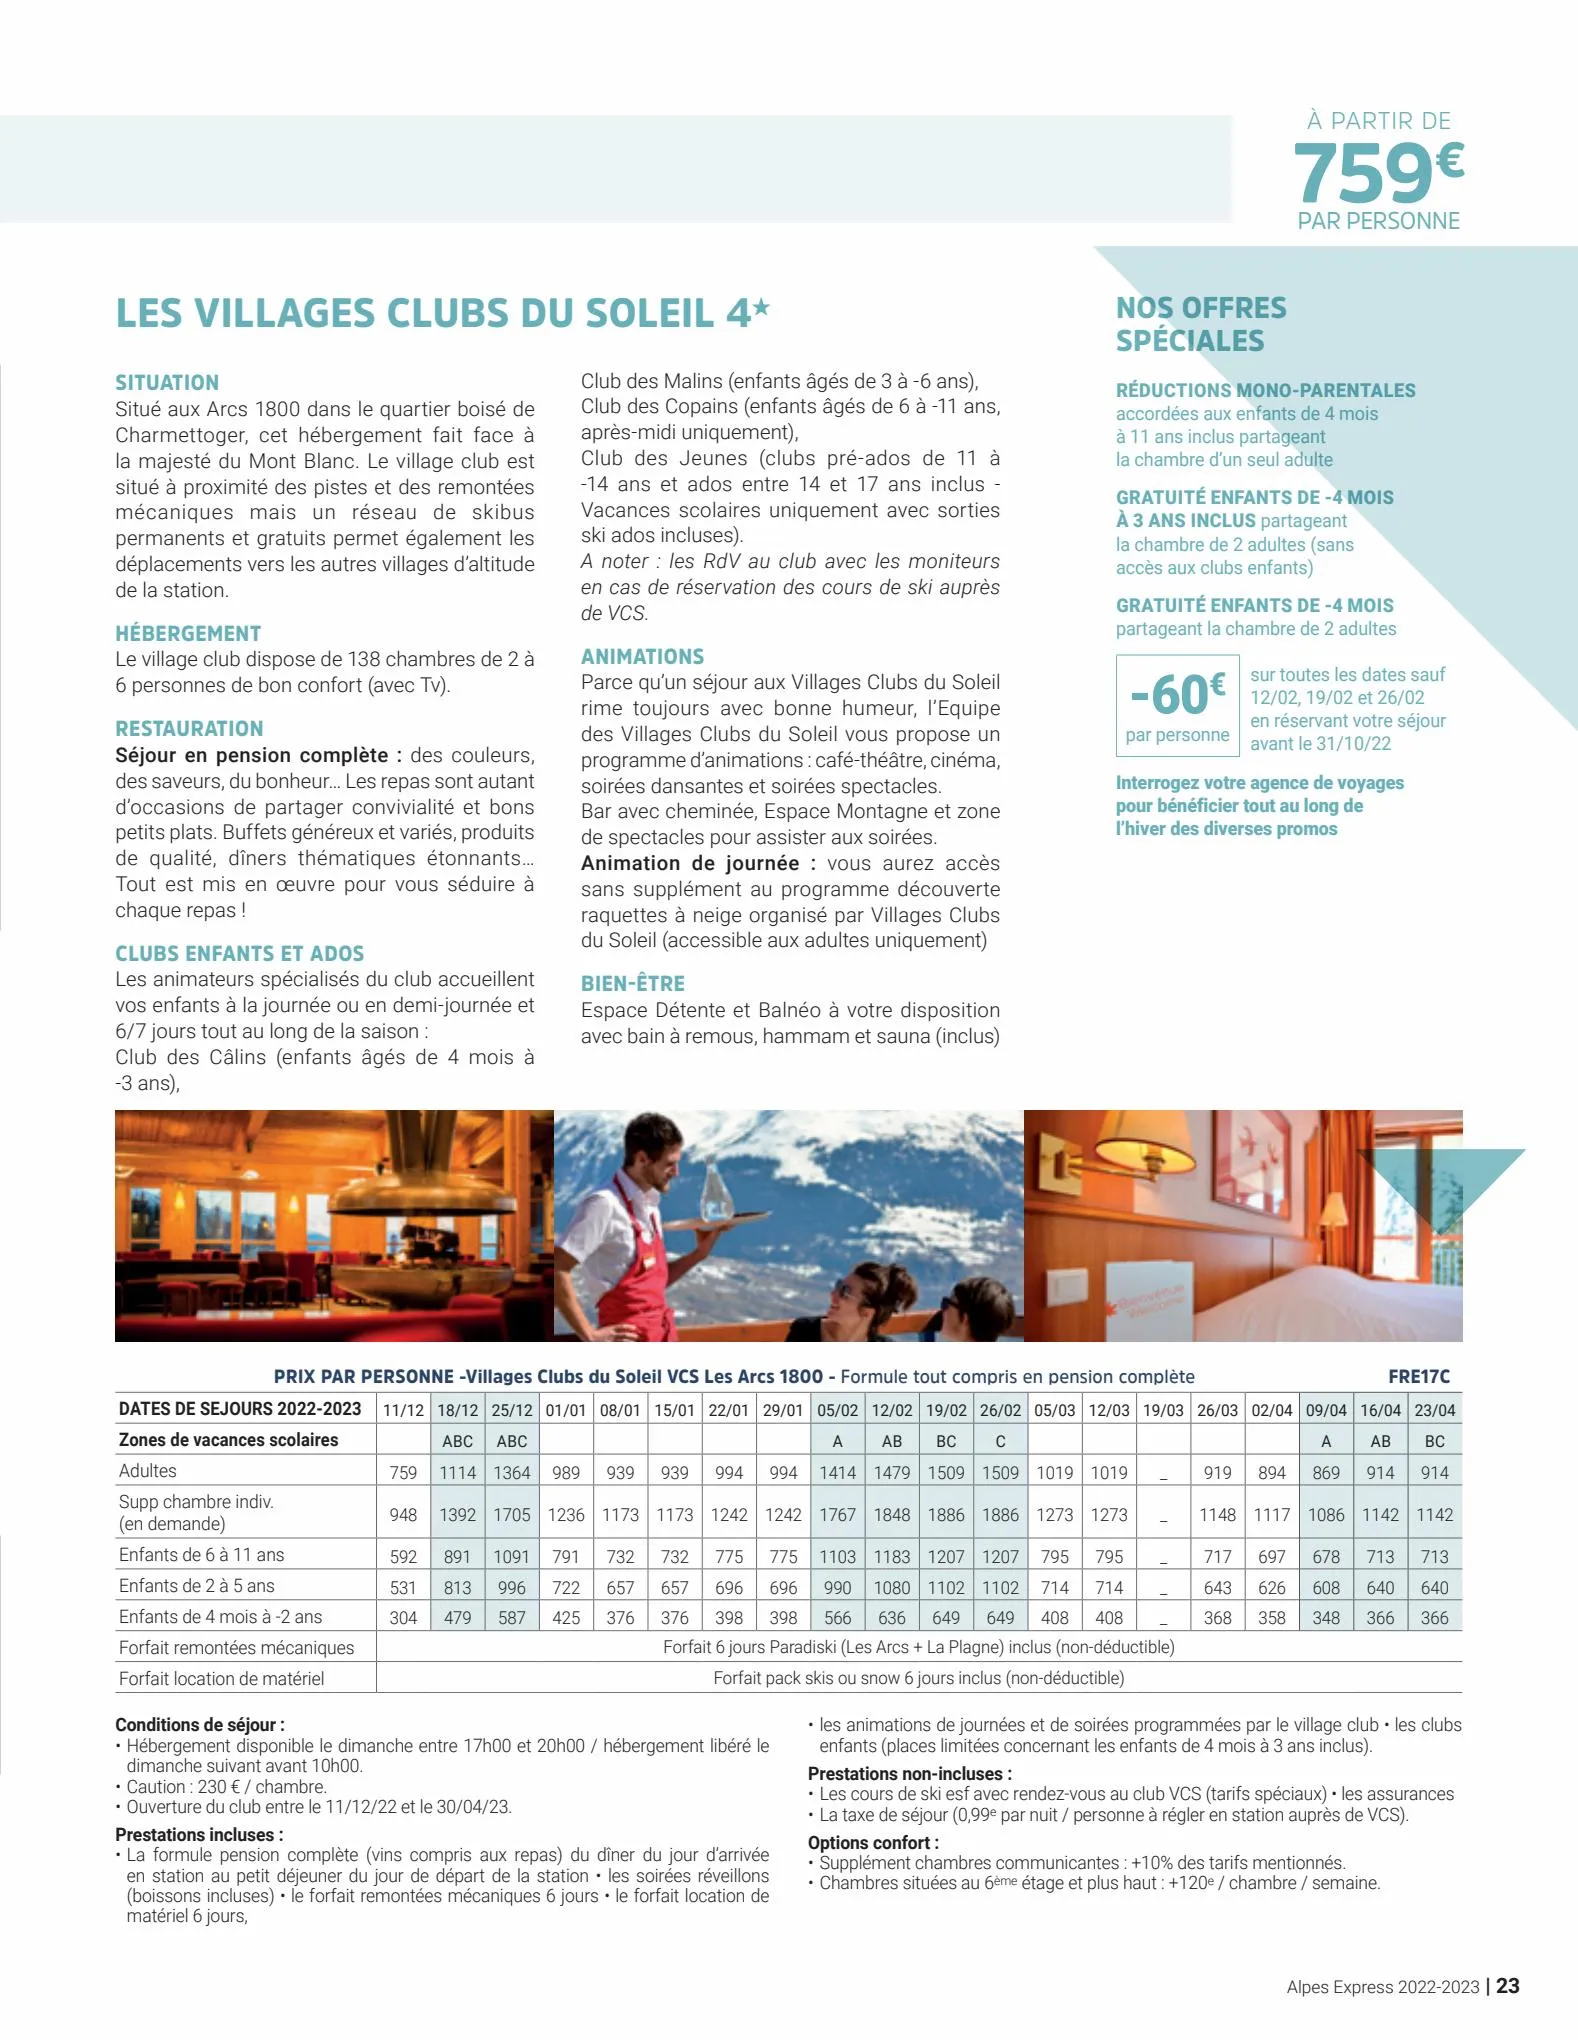 Catalogue Alpes Express - Hiver 2022-2023, page 00023